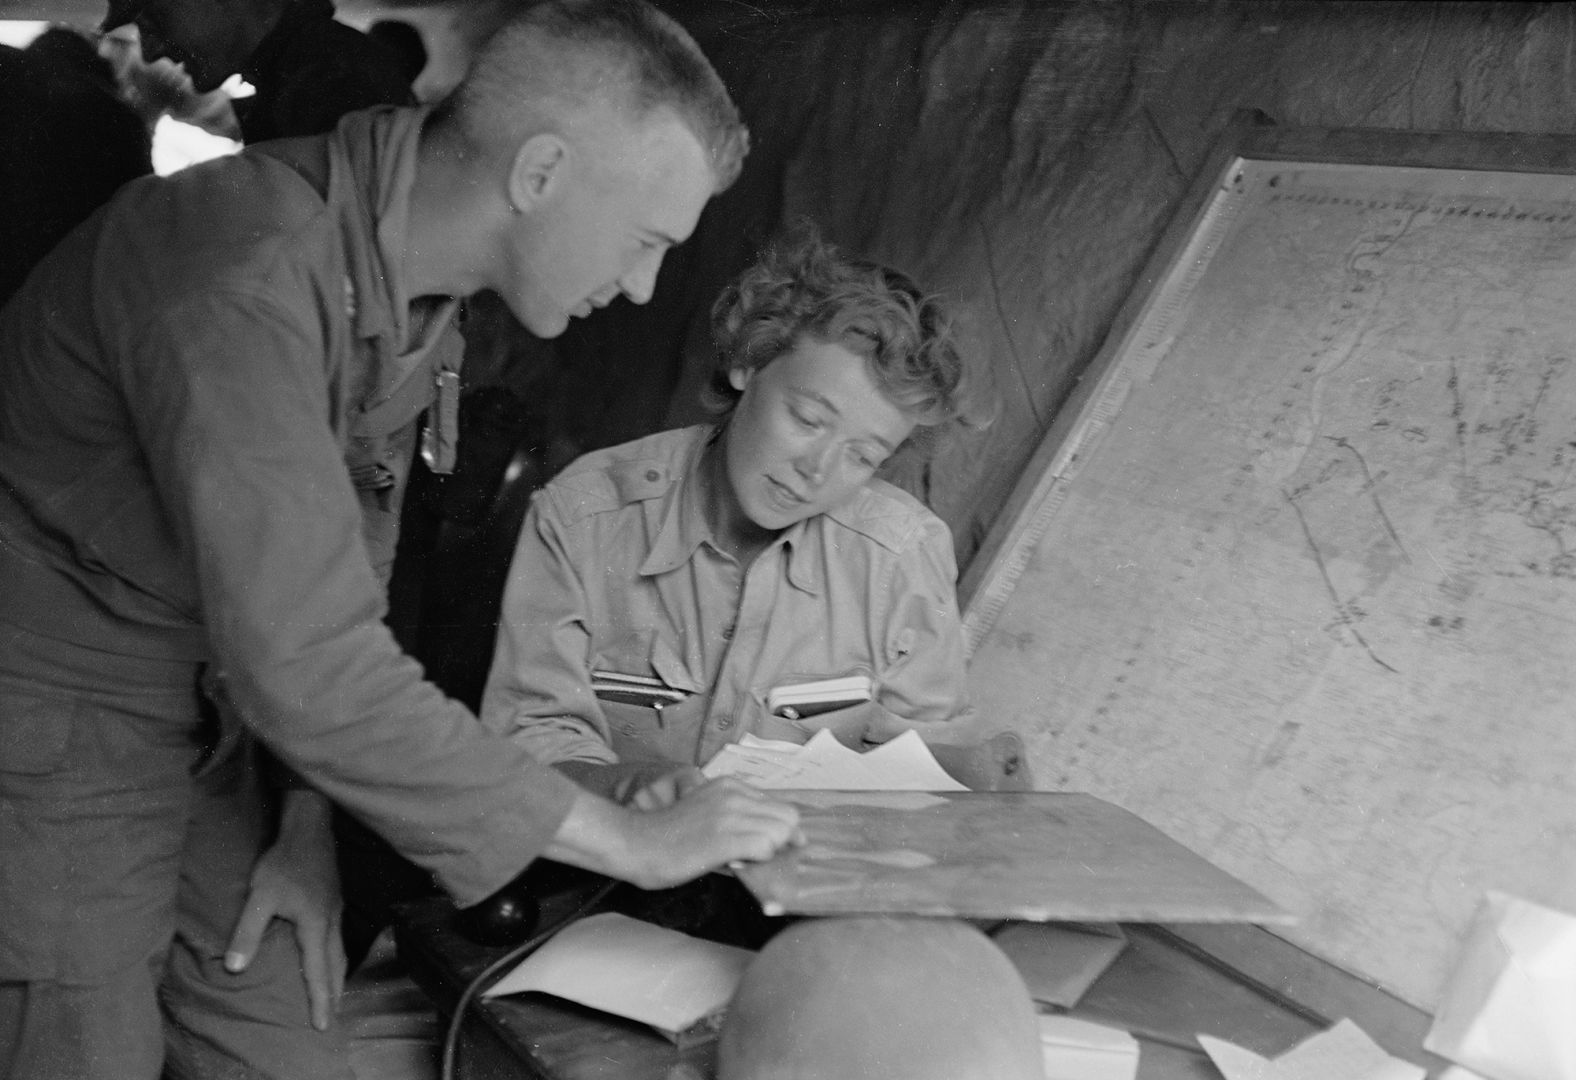 Reporter Marguerite Higgins was a trailblazer for female journalists and war correspondents. She covered the liberation of Dachau for the New York Herald Tribune during World War II, and she was one of the few women on the front lines during the Korean War. She's seen here going over notes with Col. John "Mike" Michaelis while on assignment in 1950. One year later, Higgins became the first woman to receive a Pulitzer Prize for international reporting. 